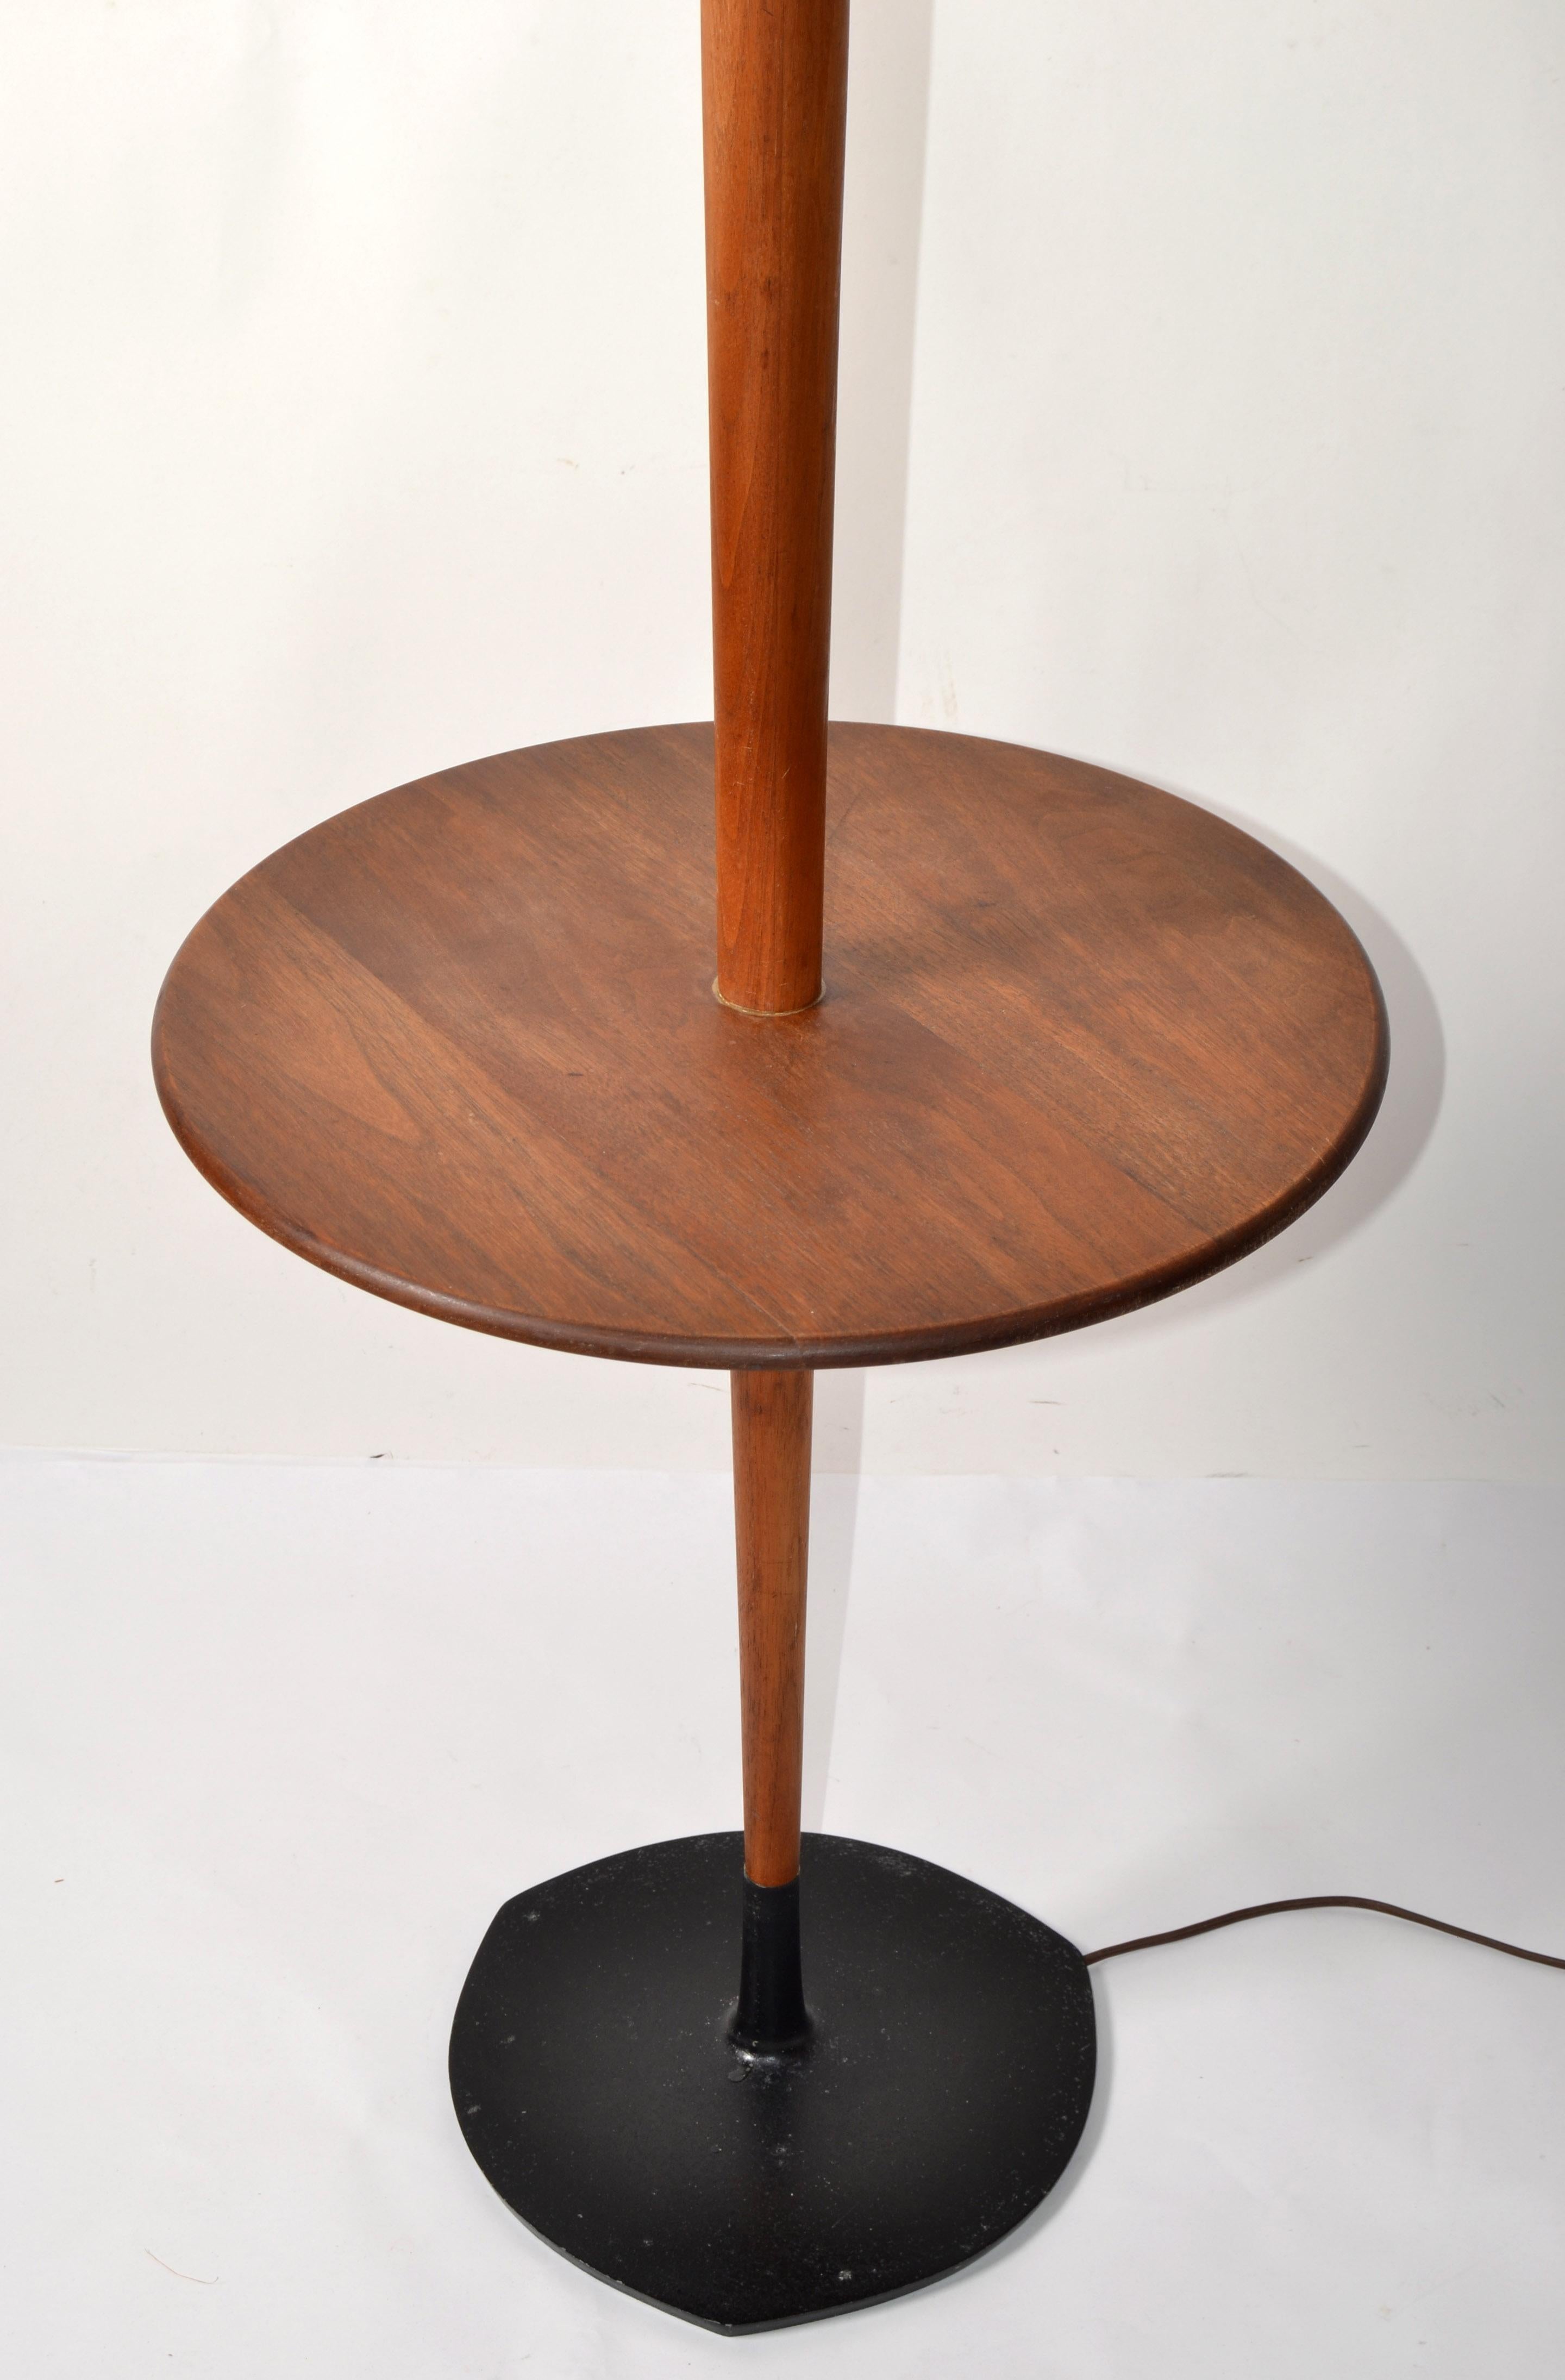 Laurel Tapered Walnut Round Table Floor Lamp Shade Mid-Century Modern American In Good Condition For Sale In Miami, FL